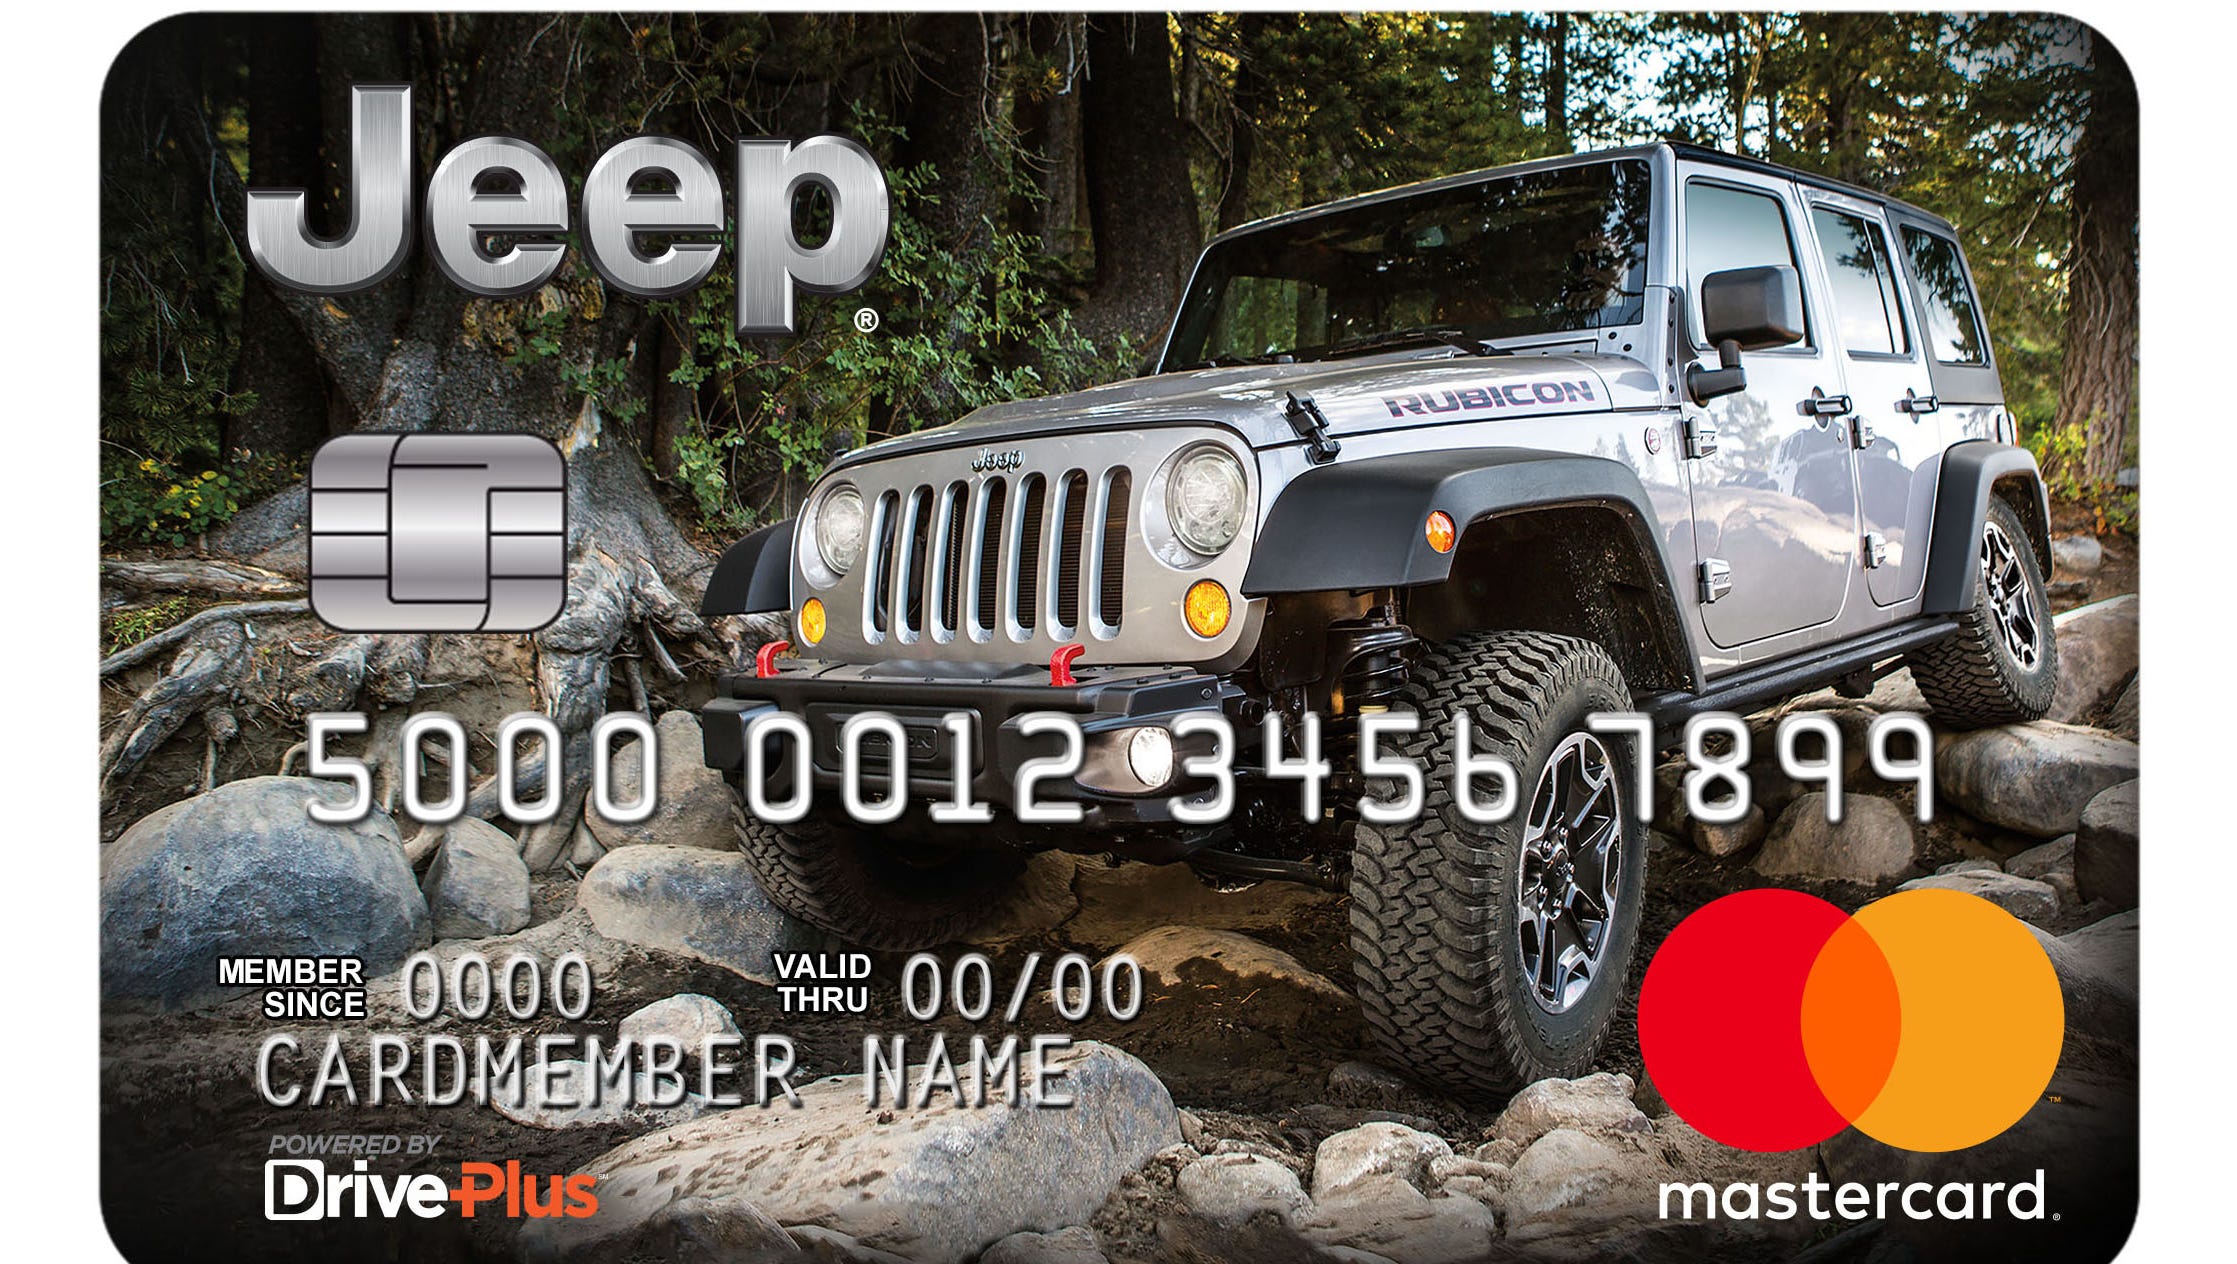 New Credit Card Rewards Launched By Fiat Chrysler